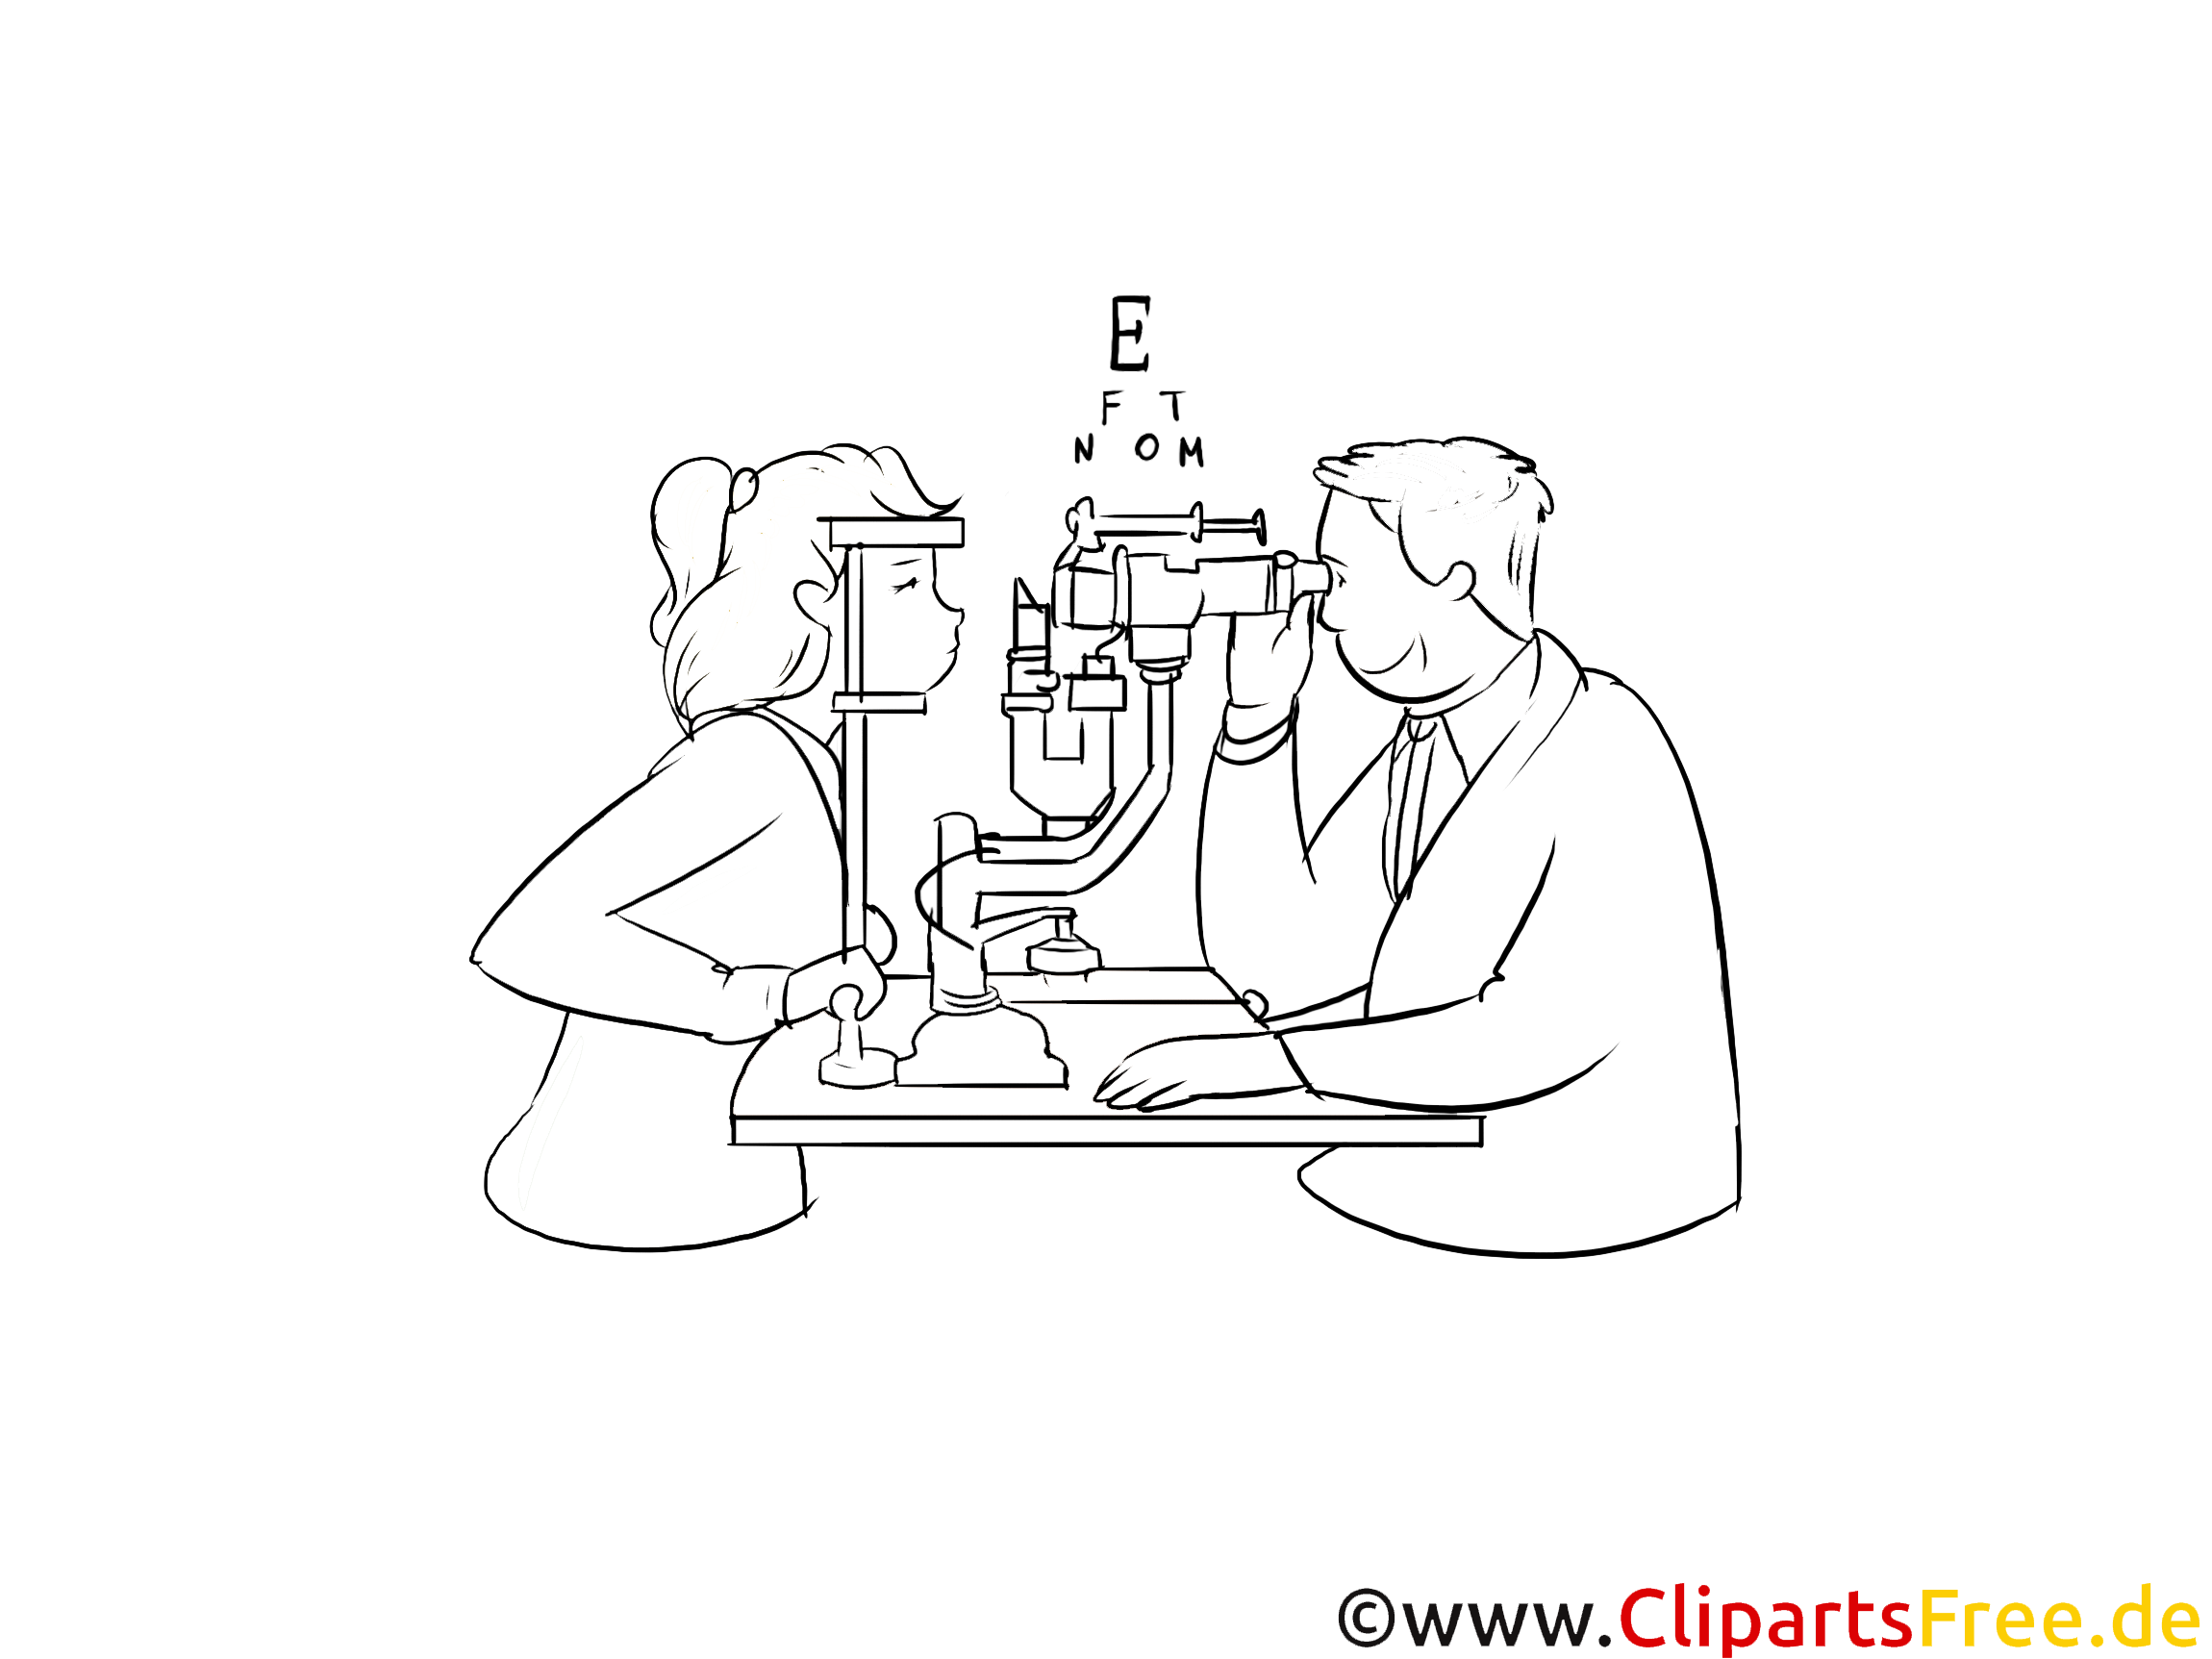 Clipart Title: Optometrist Black and White Clipart.